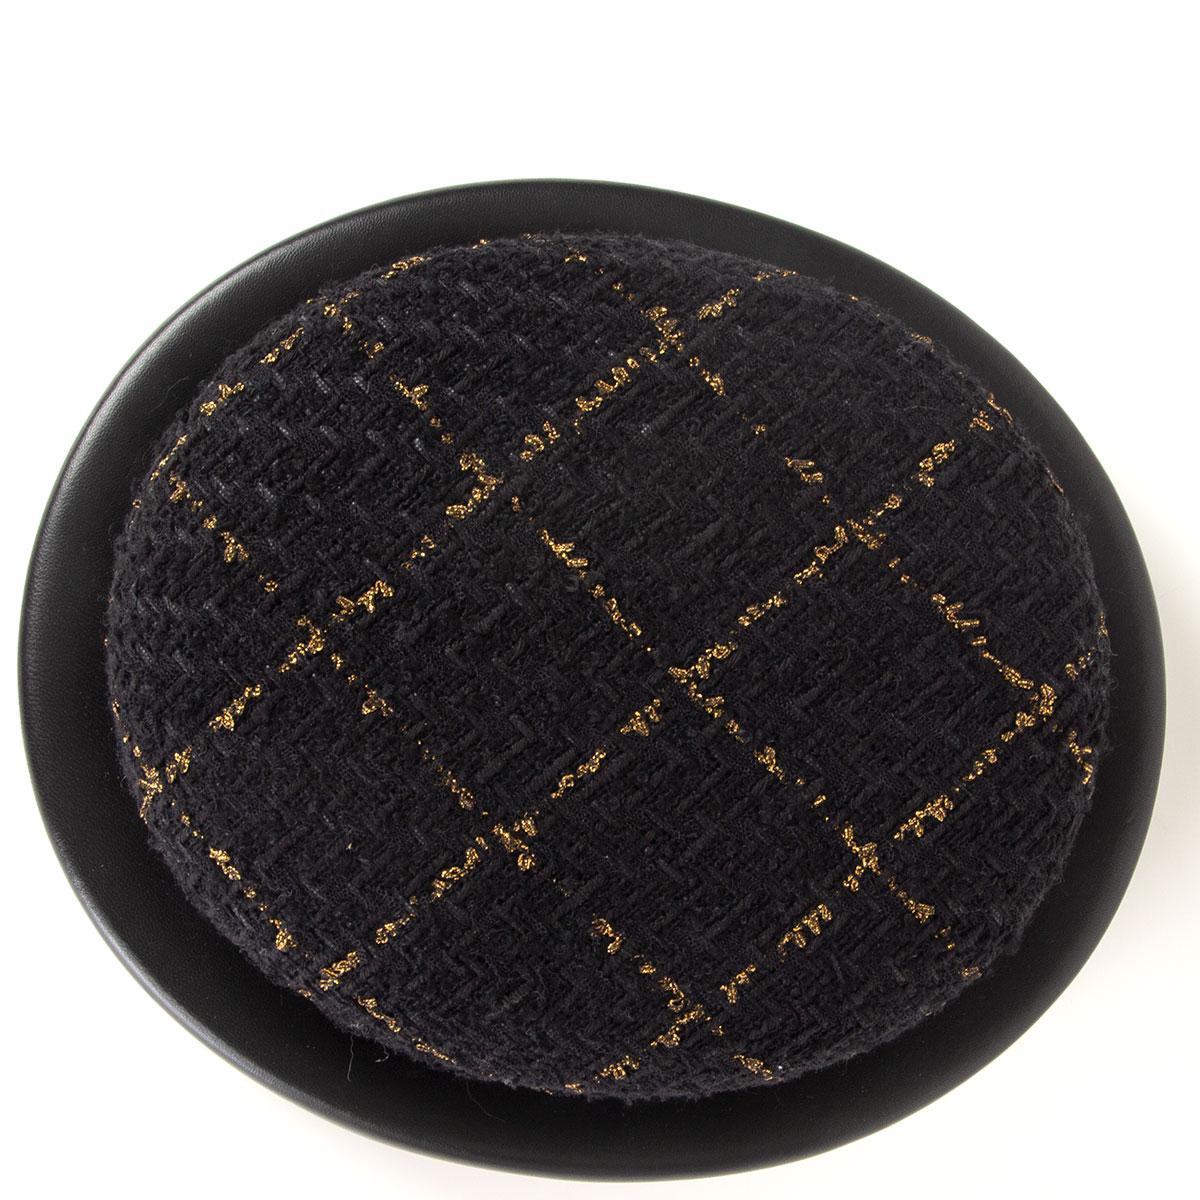 Chanel tweed riding hat in black and gold polyamide (16%), viscose (16%), wool (12%), cotton (5%), acrylic (5%), mohair (5%) and polyester (1%). Trim is made of lambskin (100%). Lined in black rabbit-hair (100%) Leather straps on the side got cut